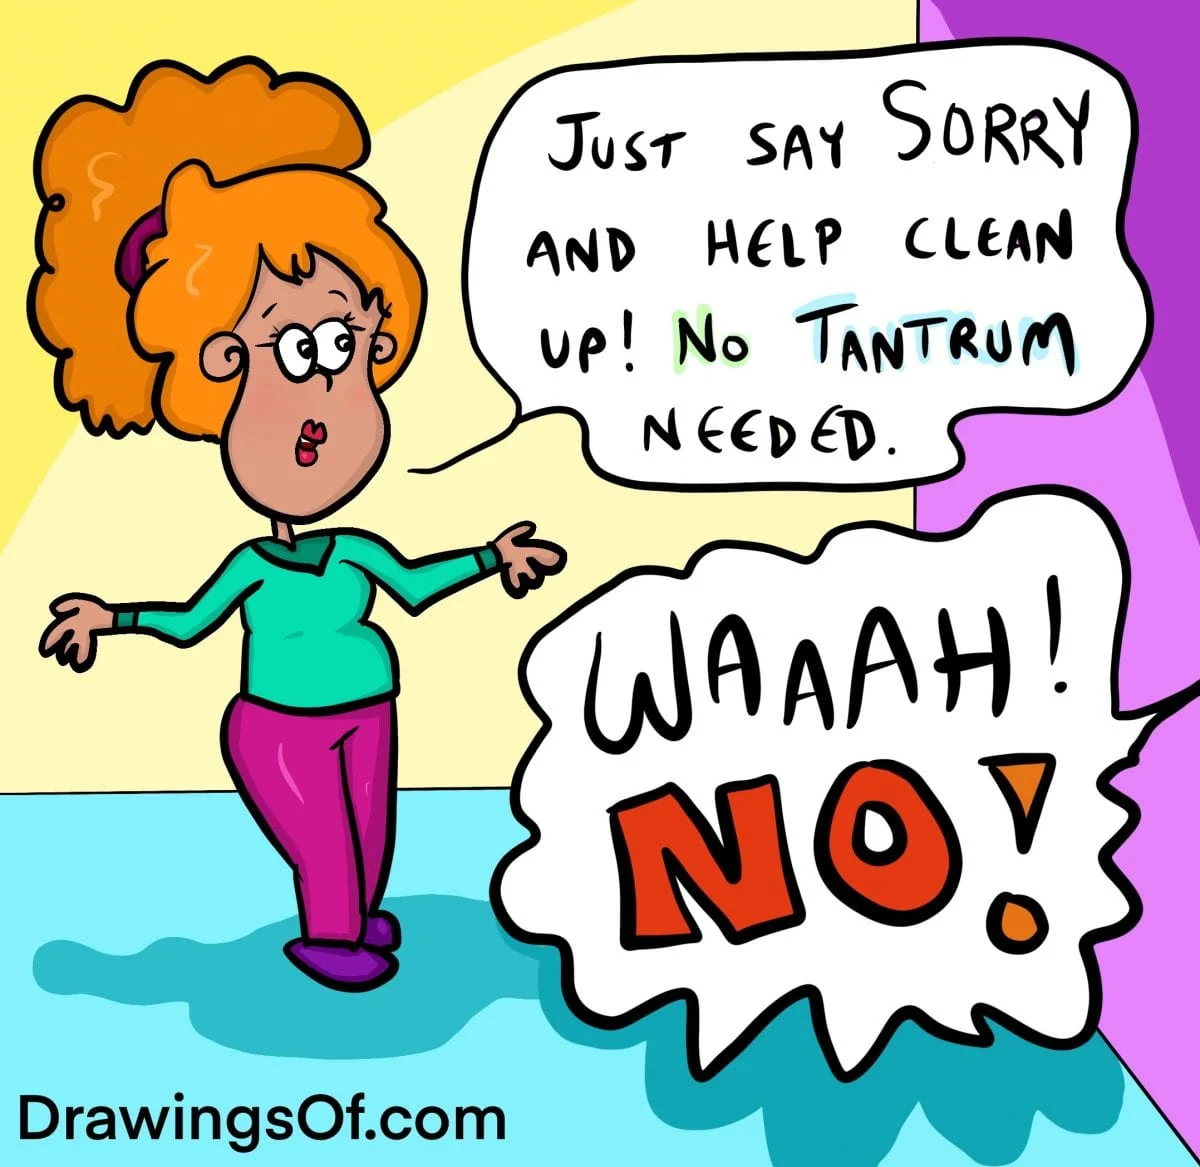 Cartoon mother gives advice on what a child should do after messing up, but child says no and has tantrum.